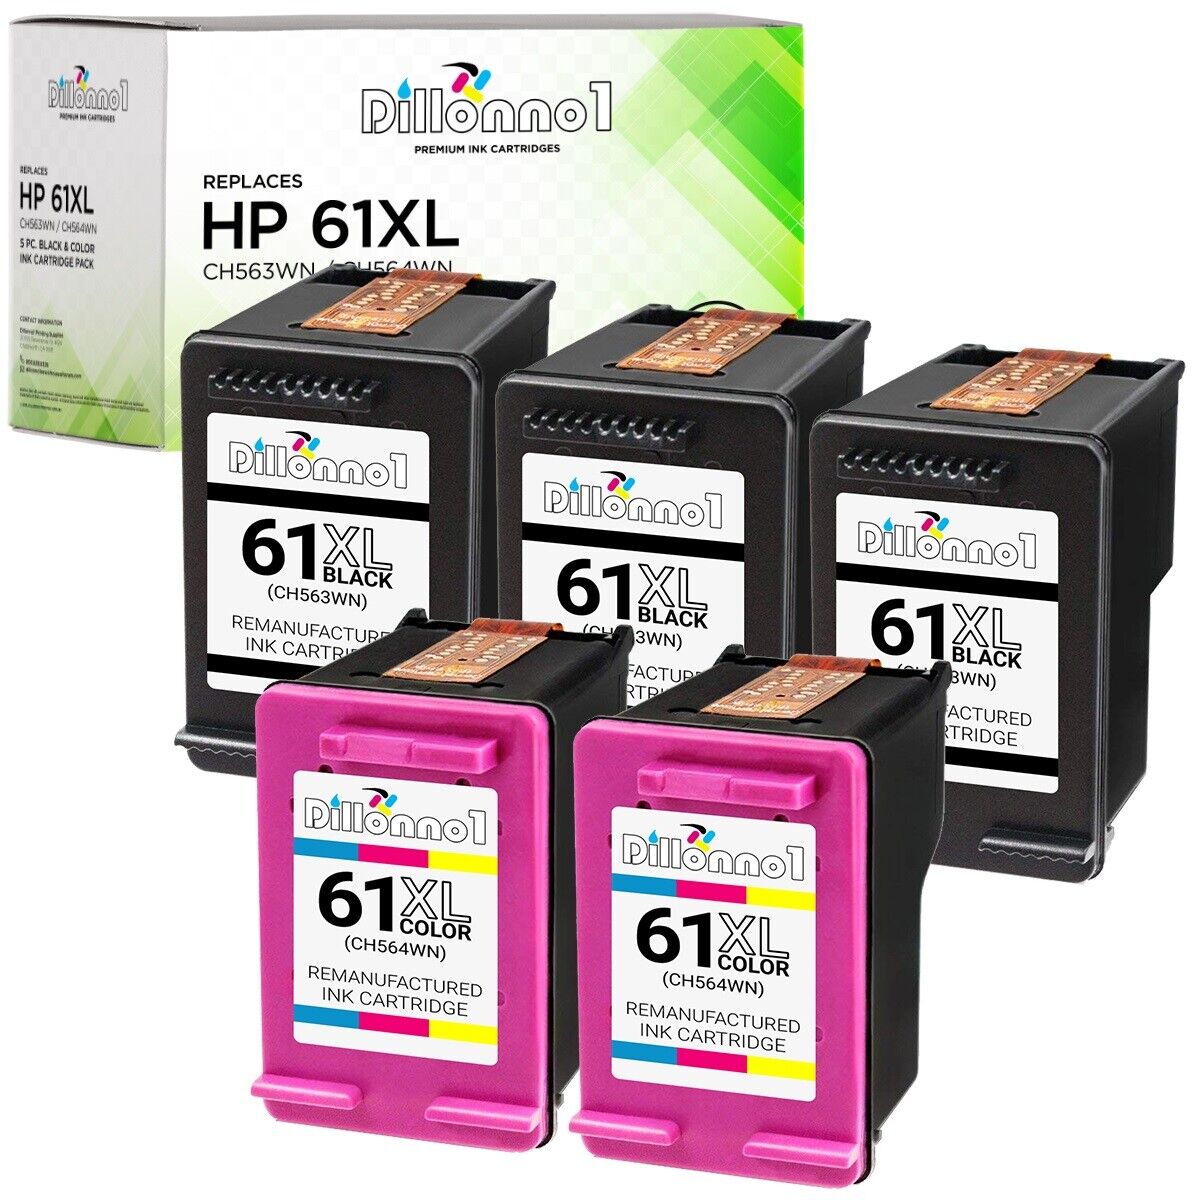 5PK for HP 61XL CH563WN CH564WN Black Color Ink For Deskjet 1000 1050 1055 2050